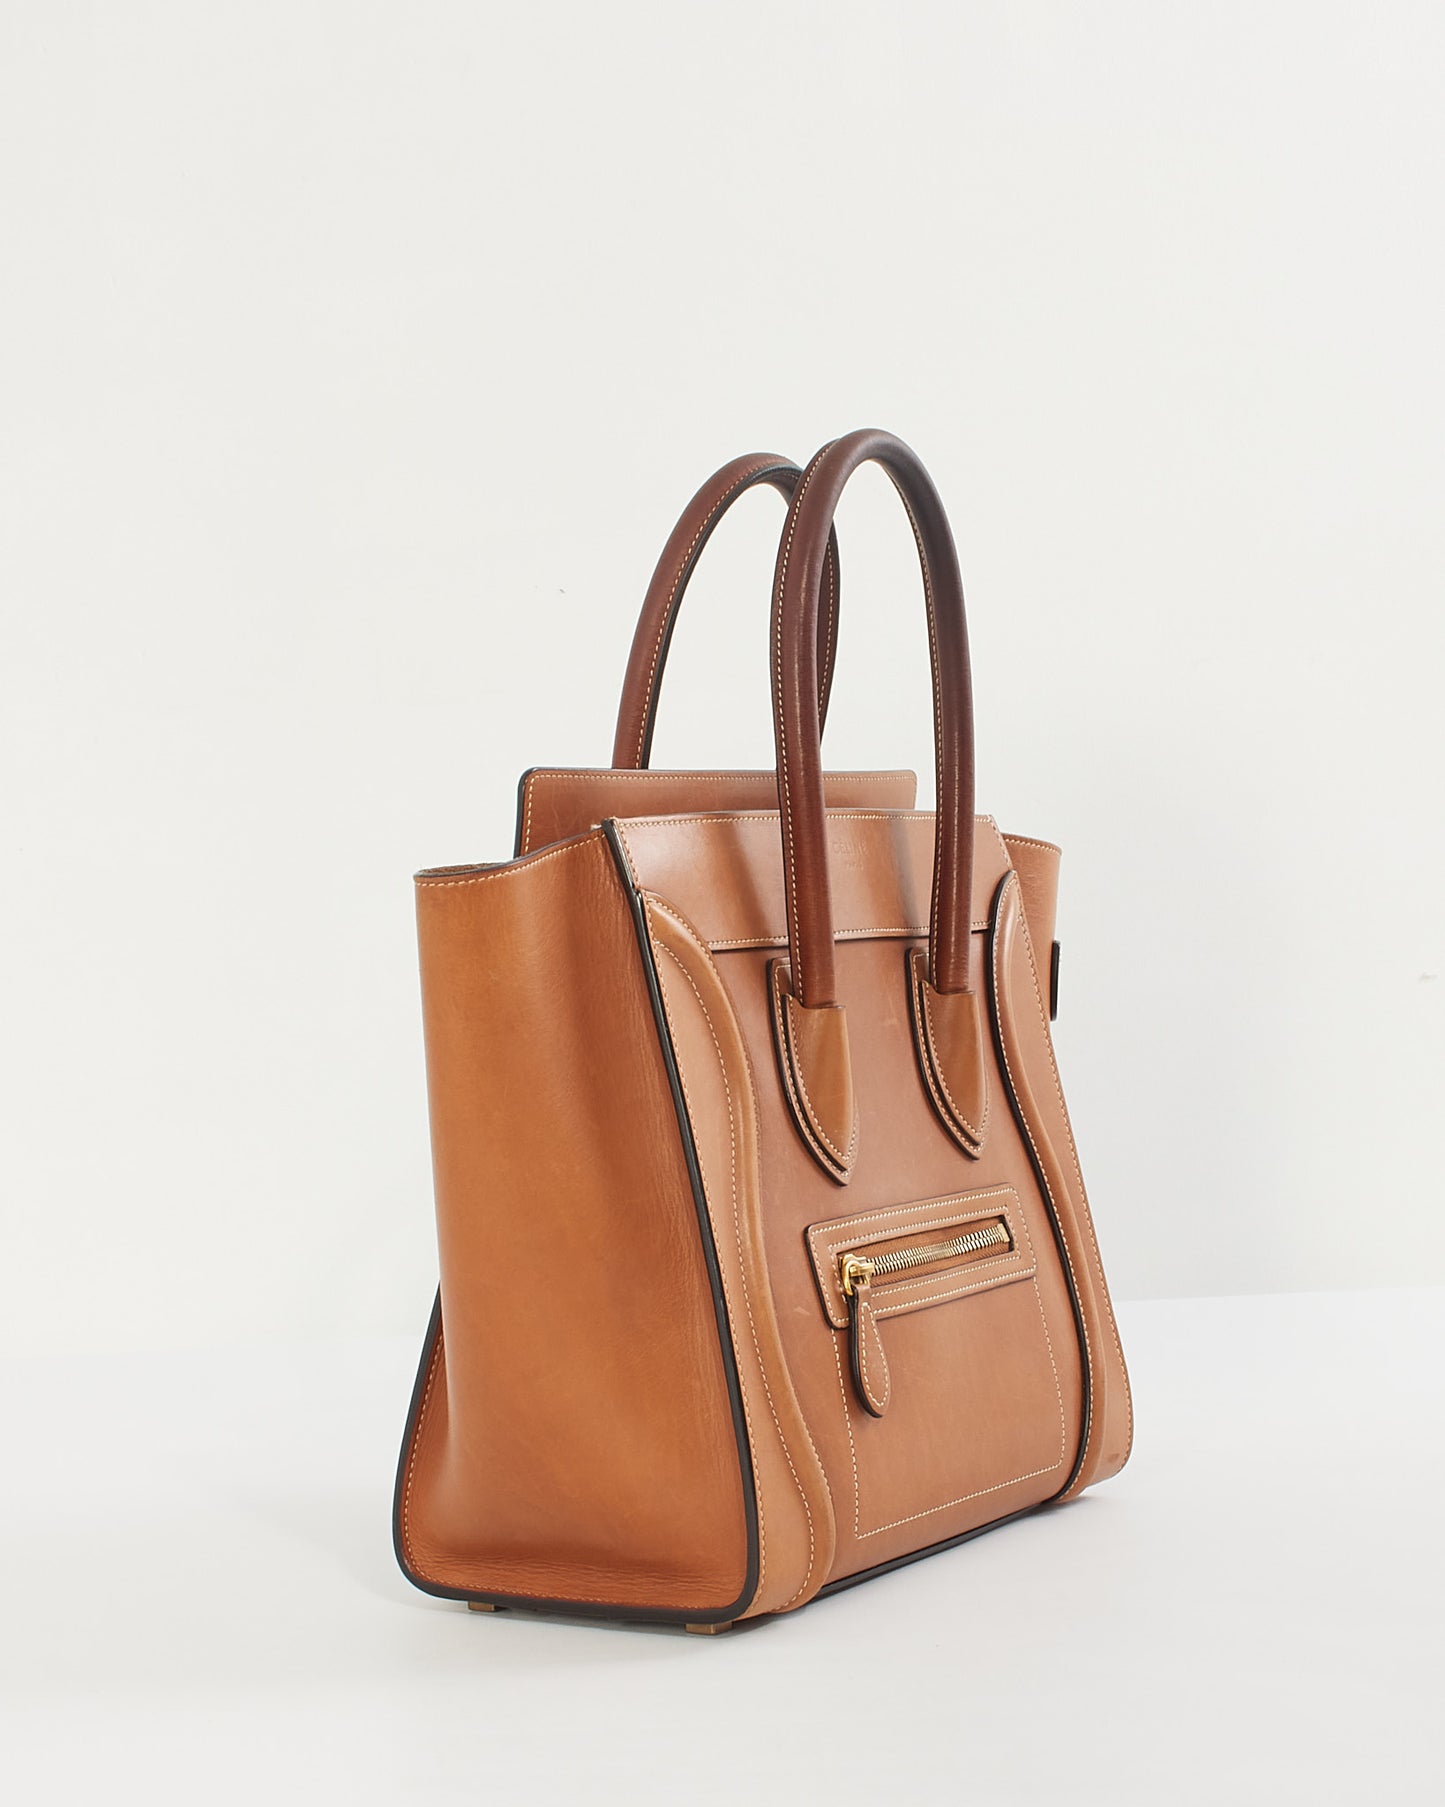 Celine Tan Smooth Leather Micro Luggage